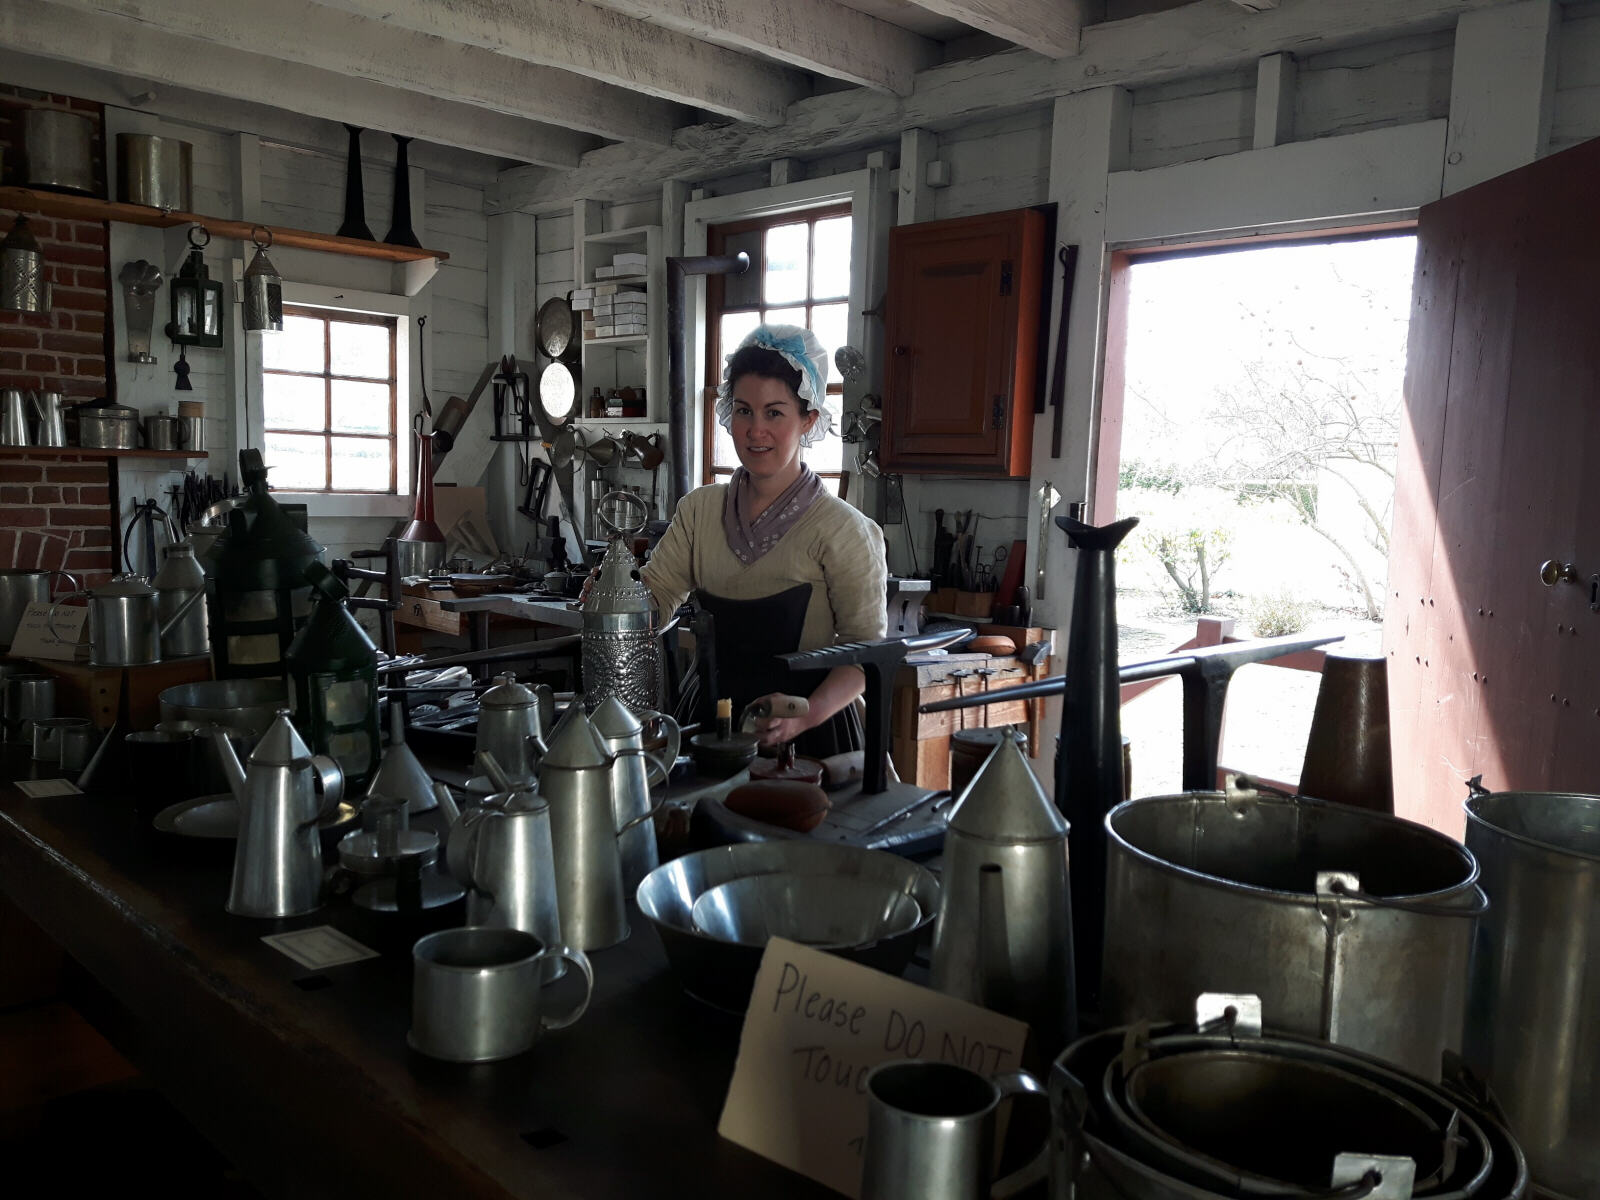 The tinmaker in Colonial Williamsburg, Virginia